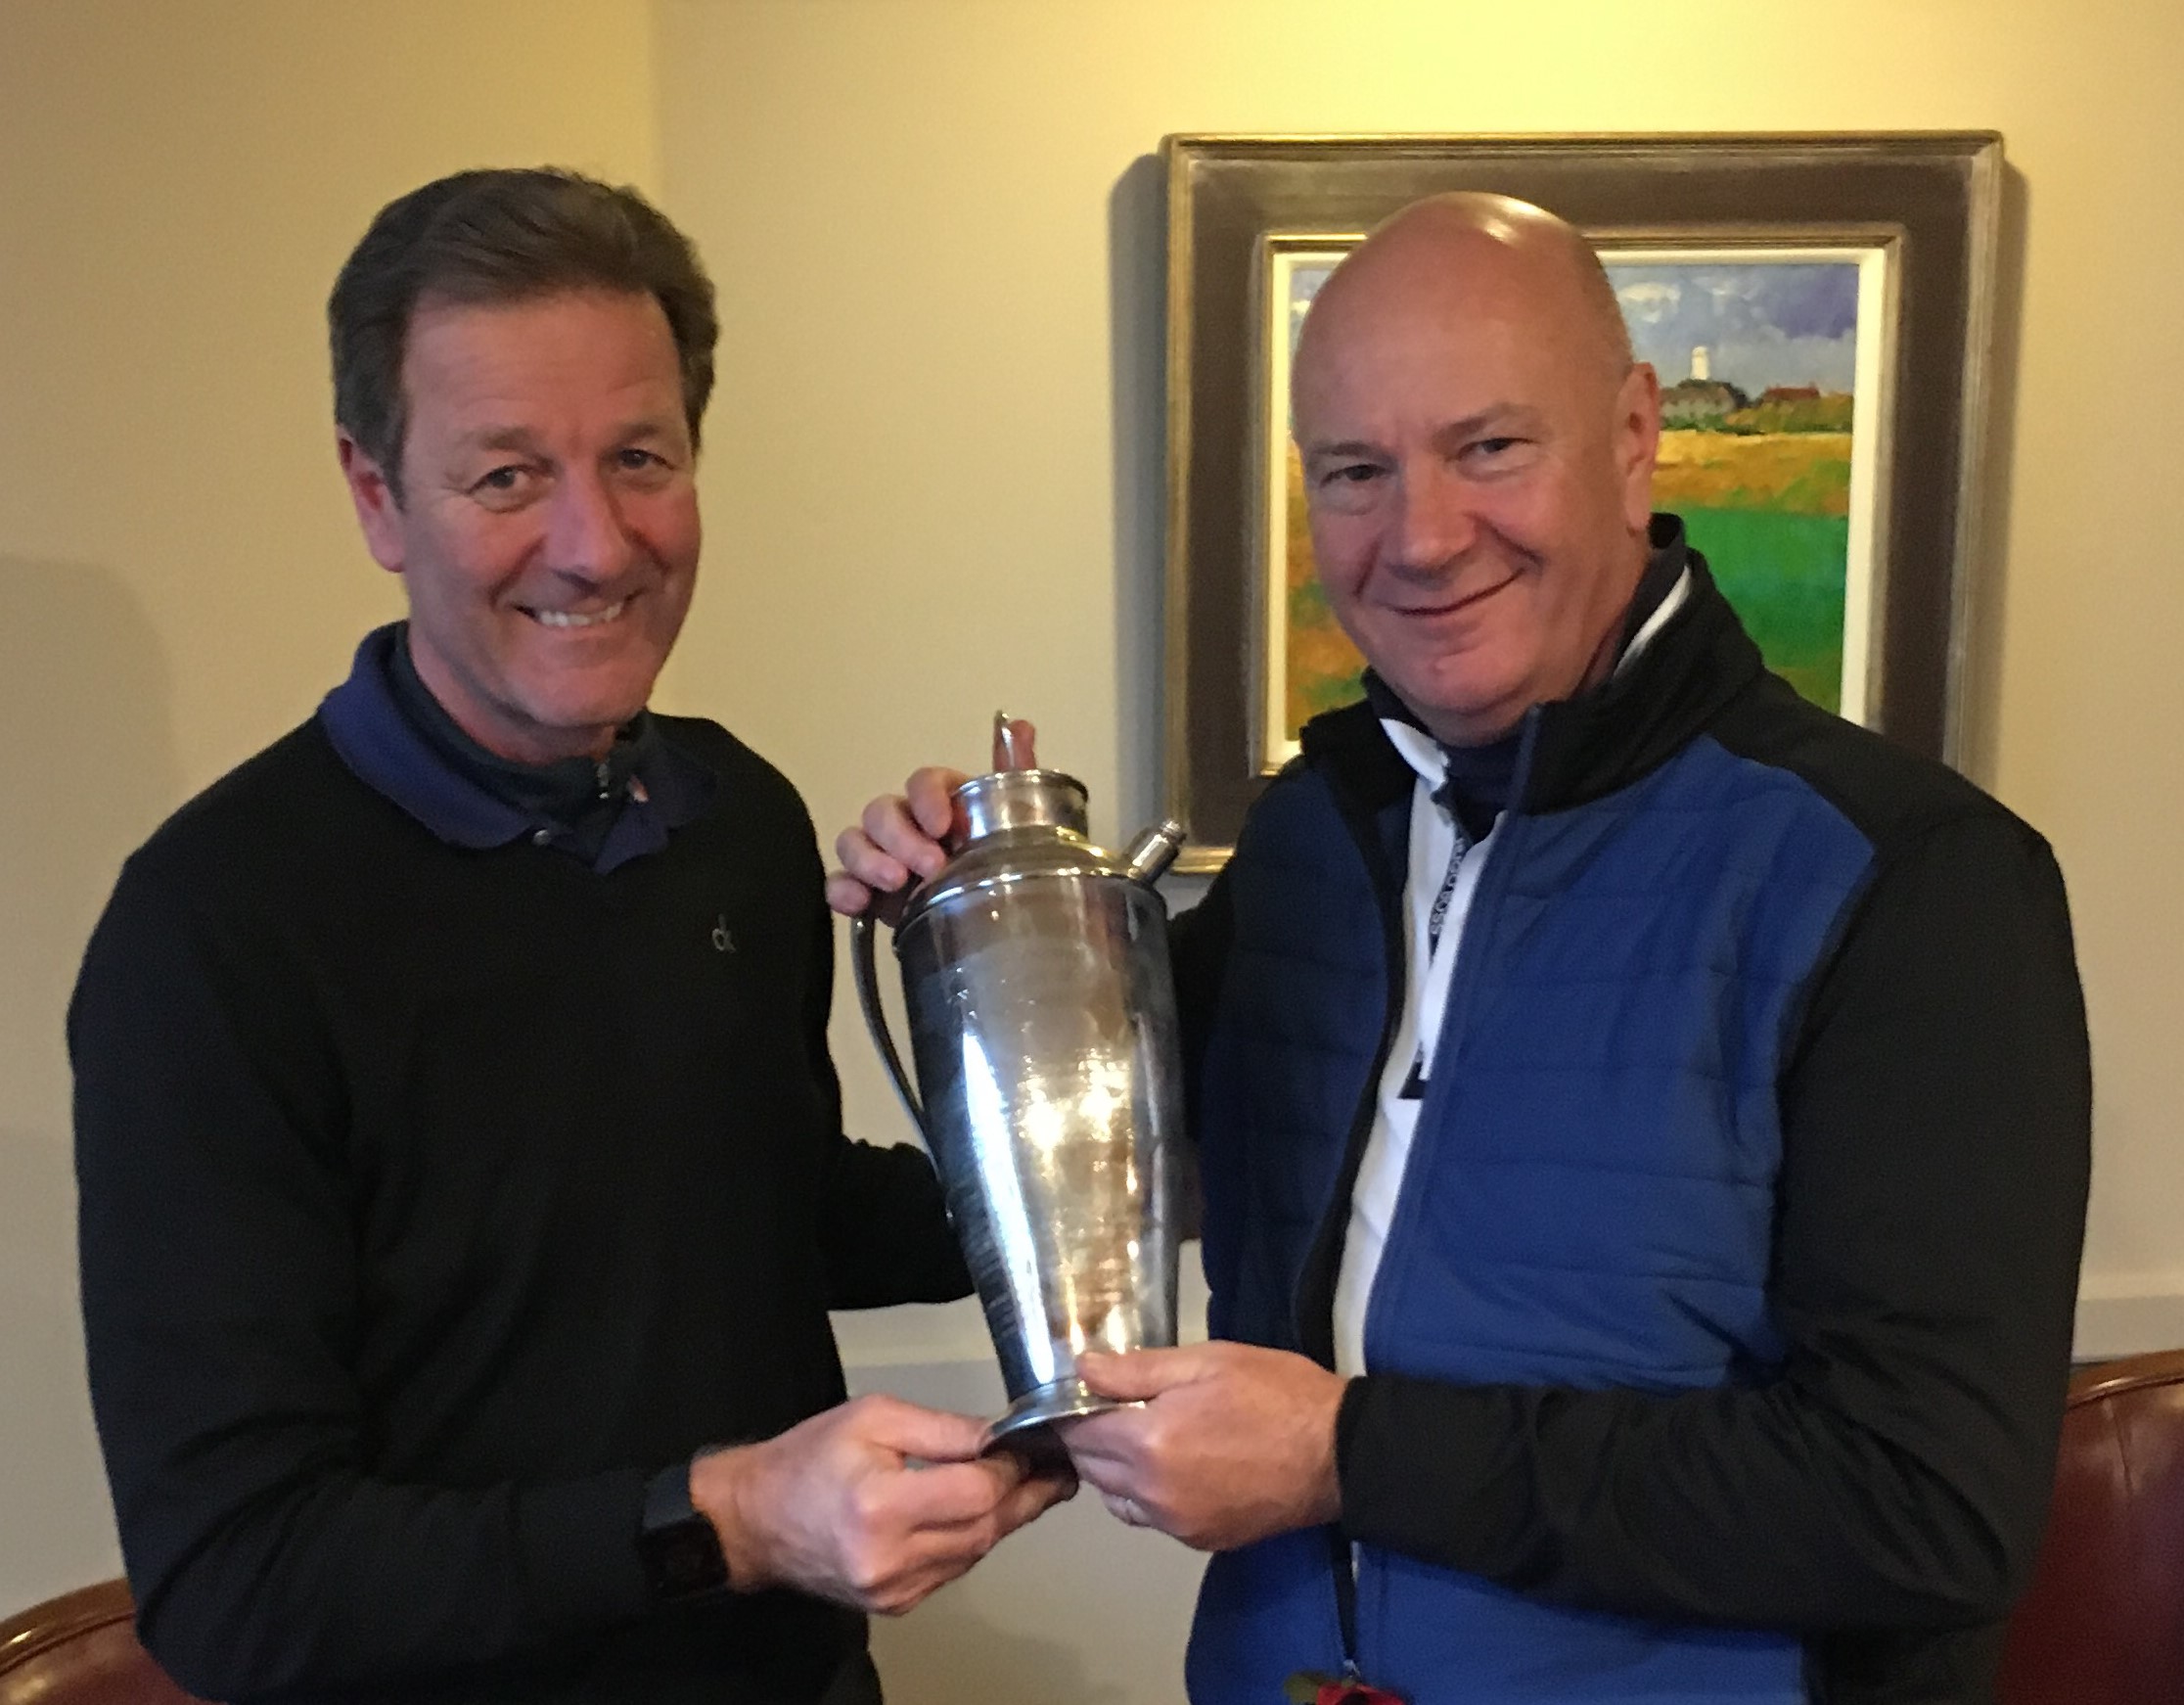 AGW Golf Captain, Peter Dixon presents Rob Perkins with the Fred Pignon Trophy. (Photo - Thank you to David Canon)